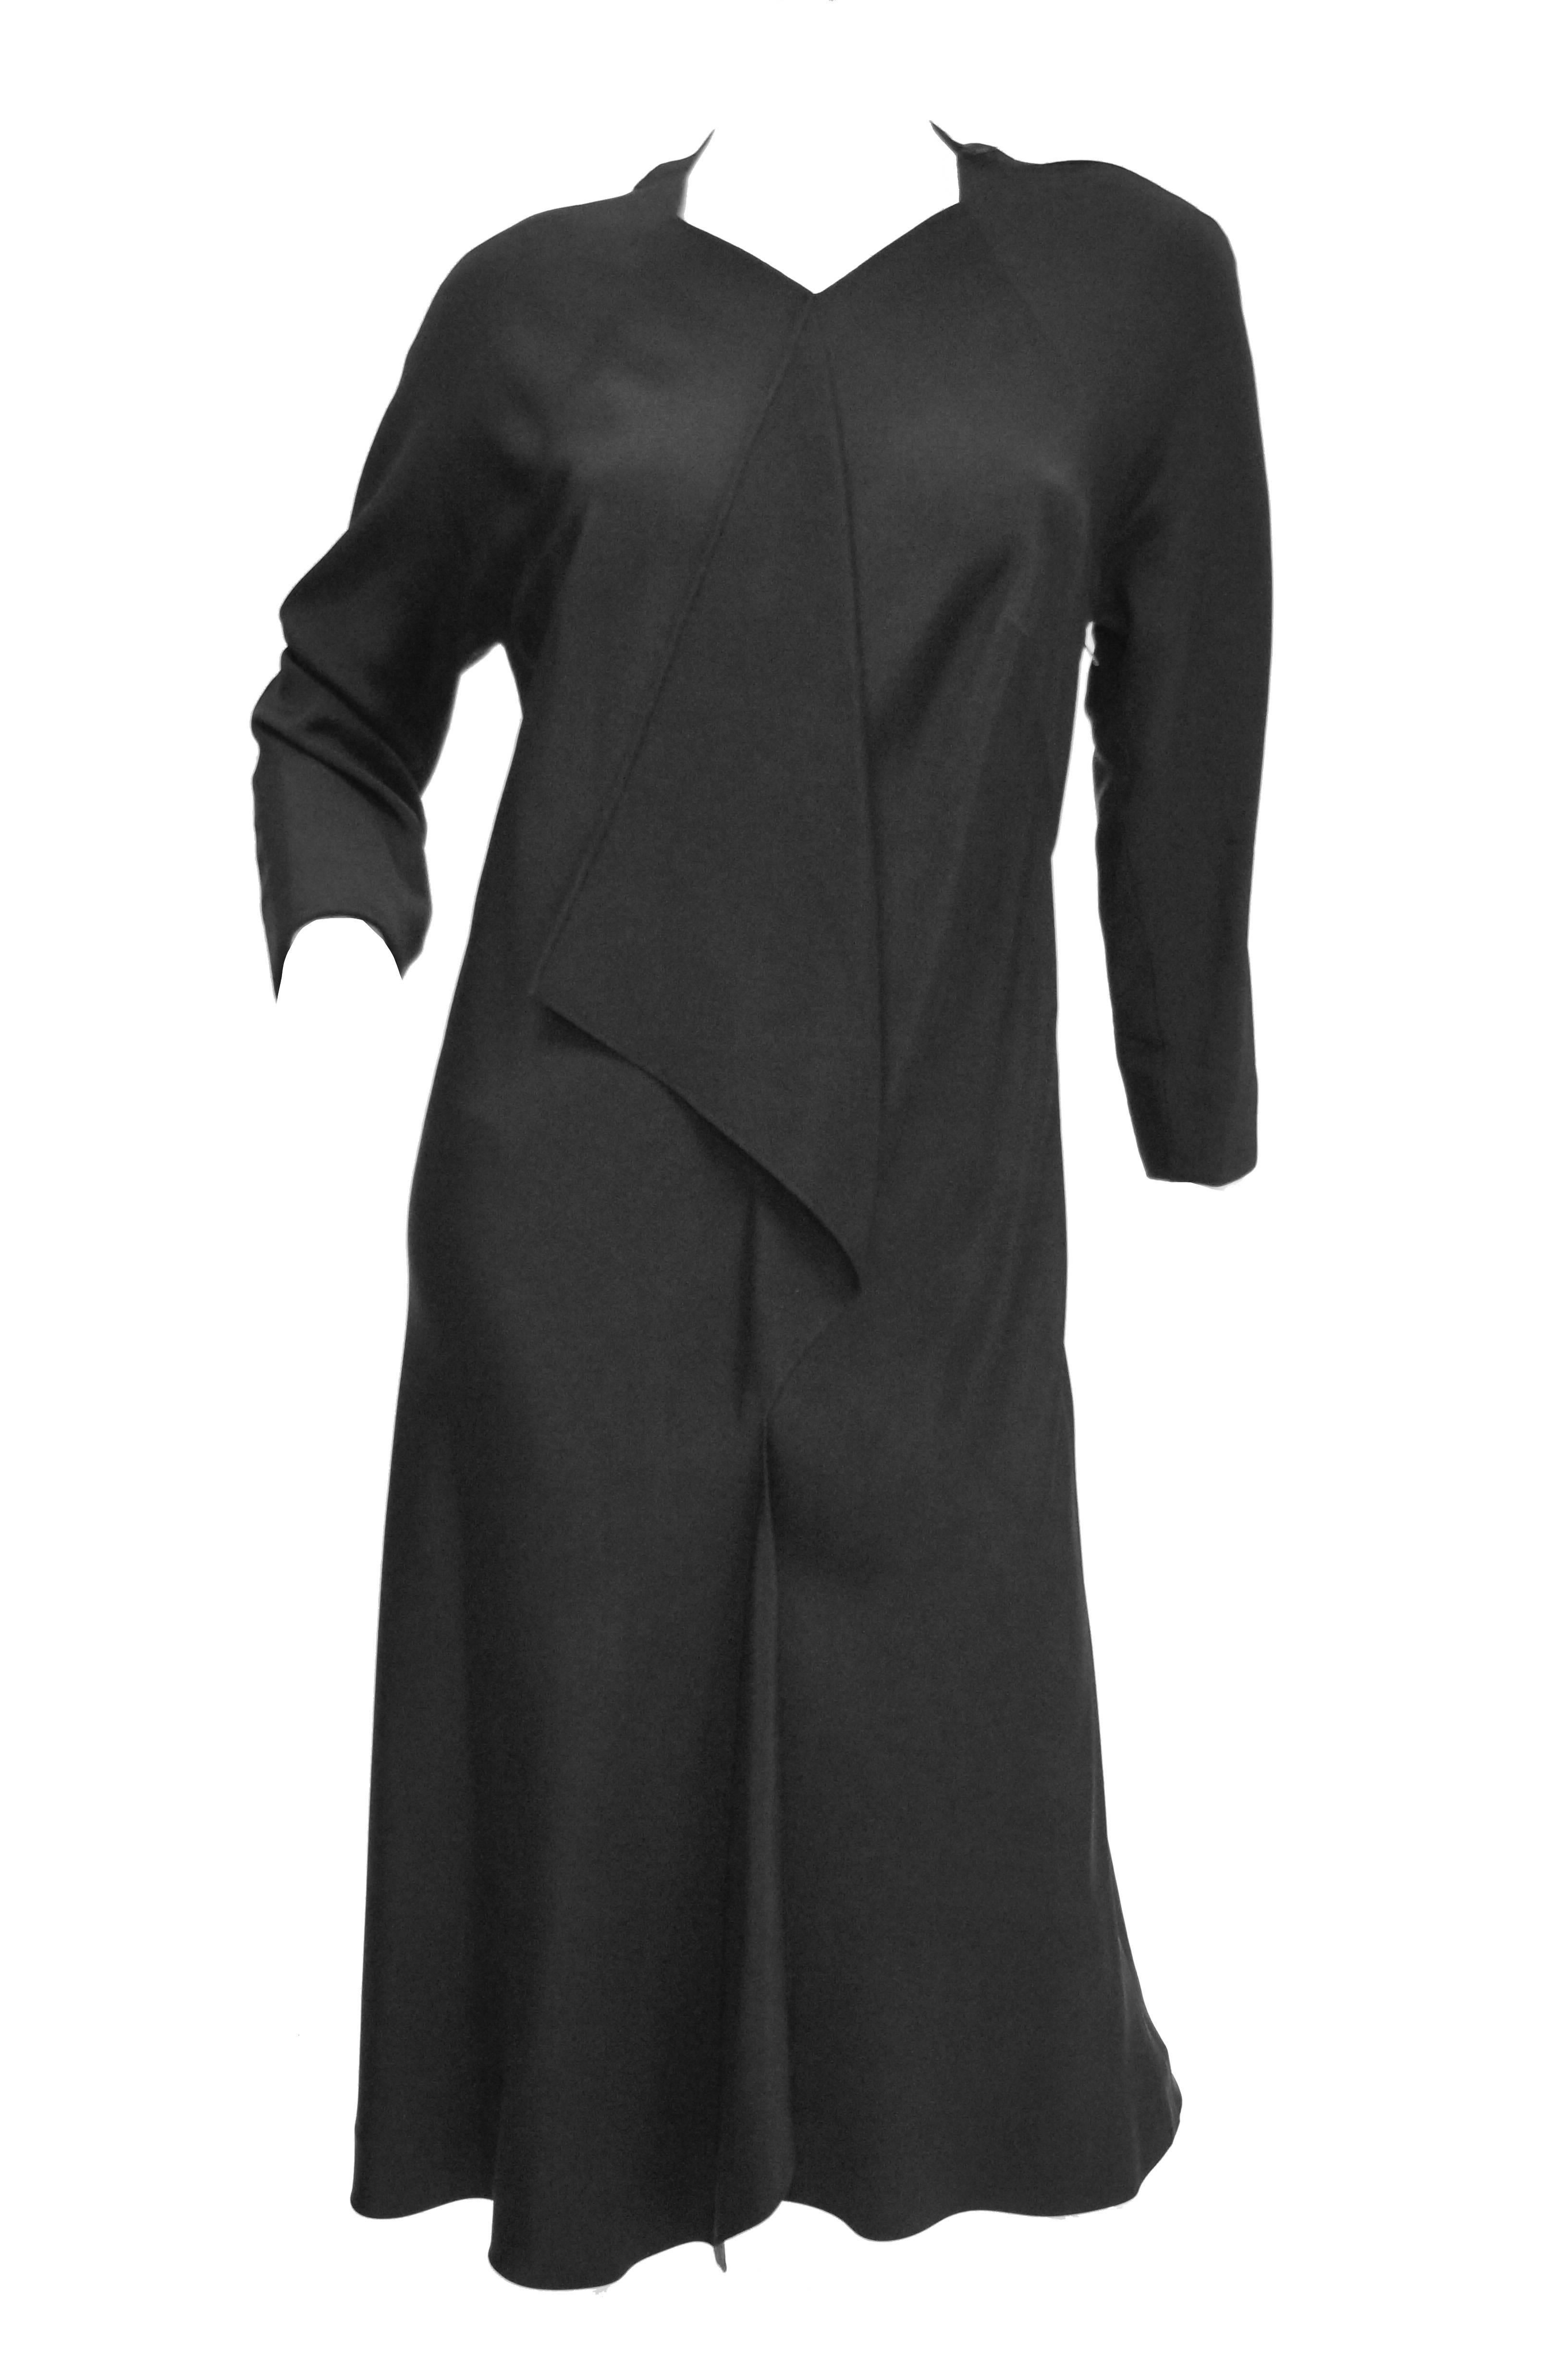 Gorgeous black silk faille evening dress by Madame Gres. The knee length dress is sleek, with a loose body - skimming silhouette, long sleeves, and a high, diamond cut neckline. The sleeves have a dolman - like cut. The dress has a front center seam